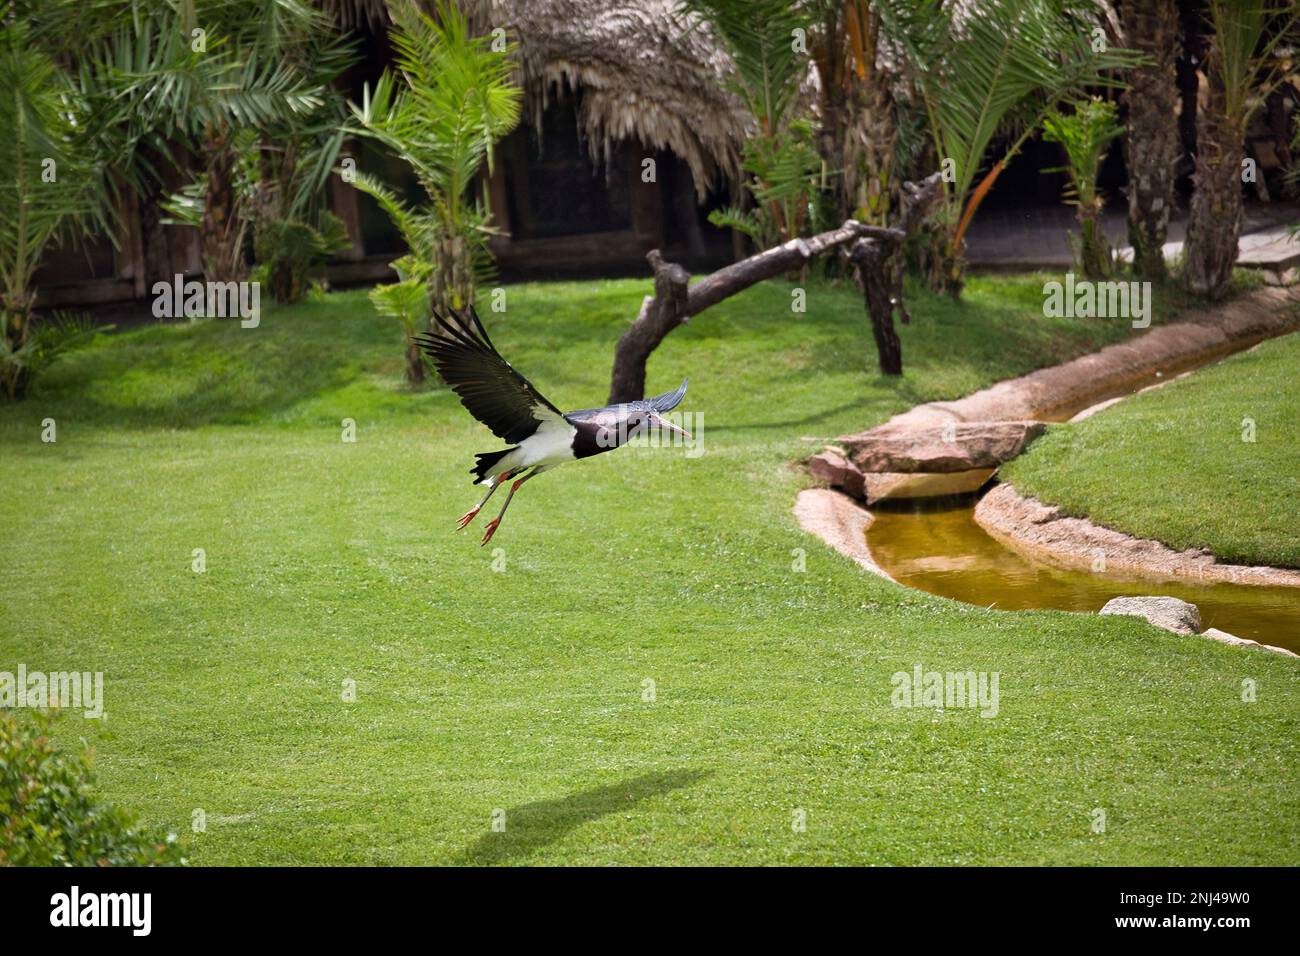 Full body shot of an Abdim stork about to land in a grassy landscape with palm trees in the background. Stock Photo